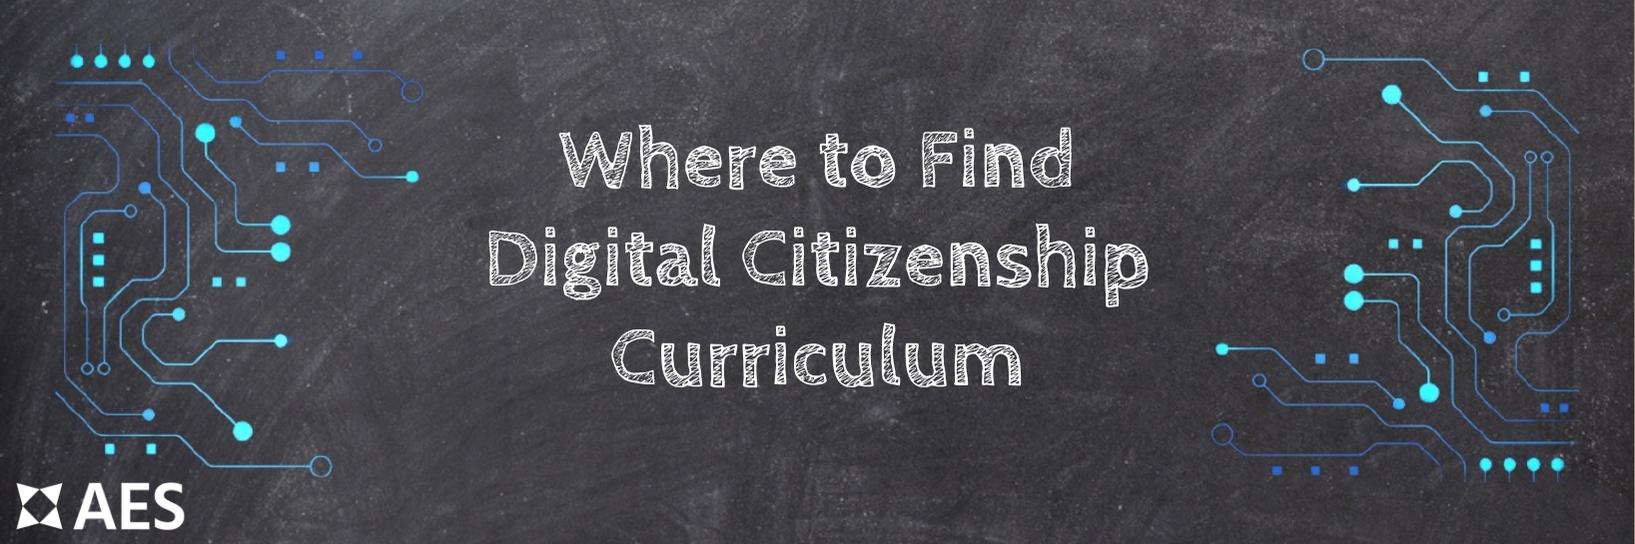 Digital Citizenship Curriculum: Which Option Is the Best?